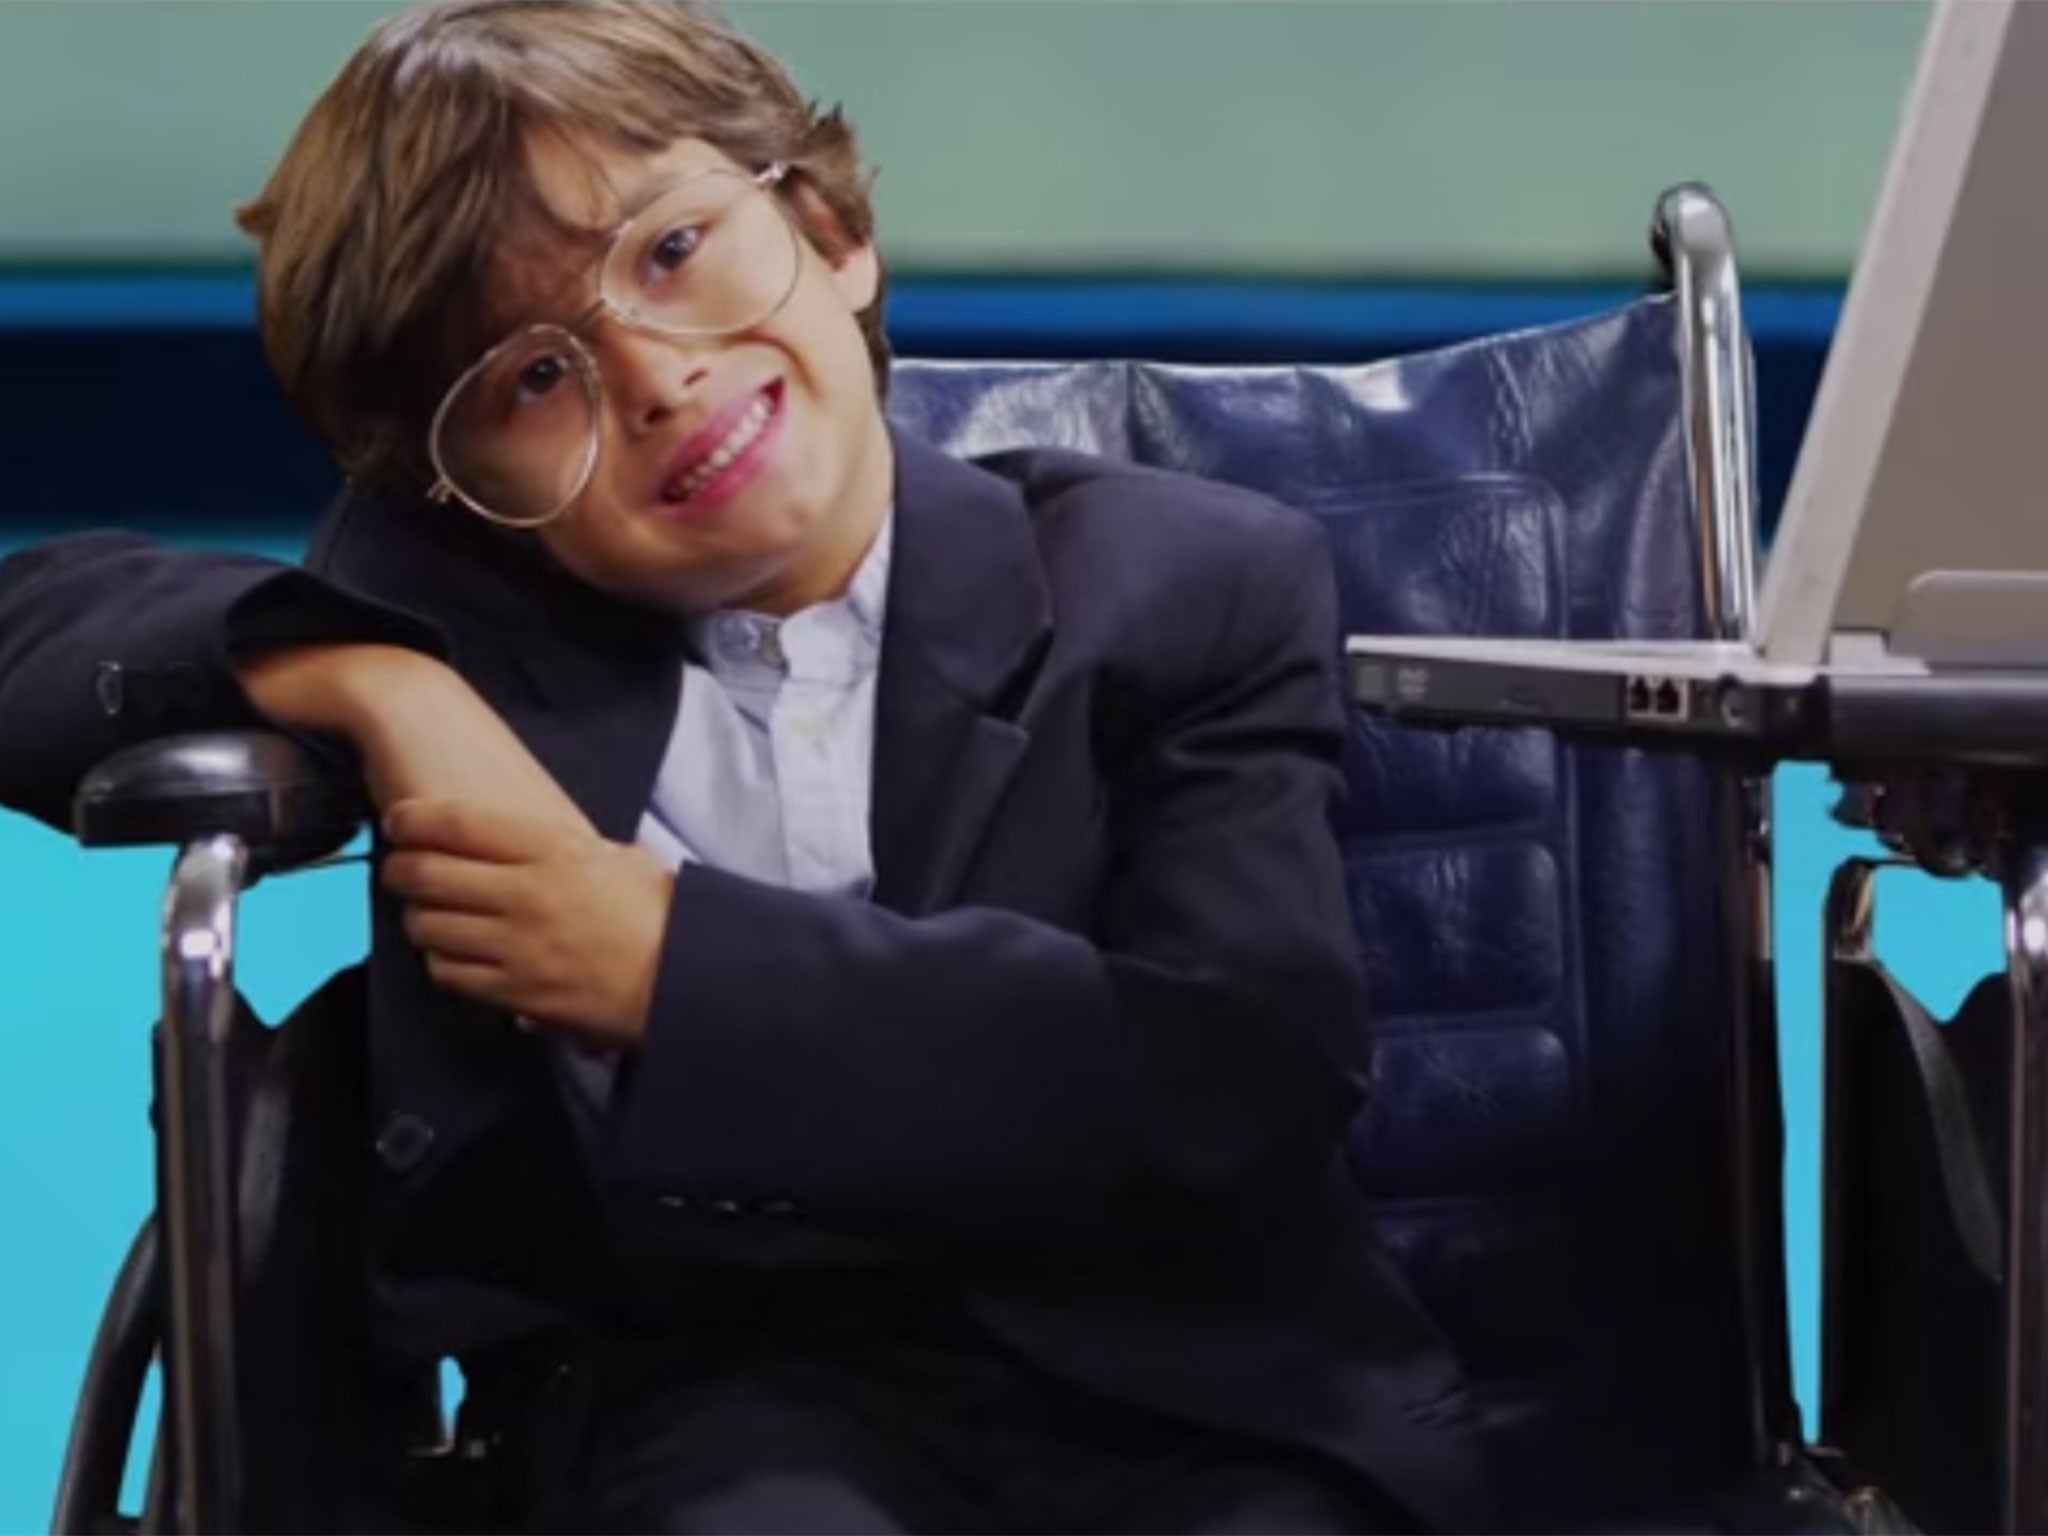 Kids parody Oscar-nominated movies including The Theory of Everything in hilarious YouTube video